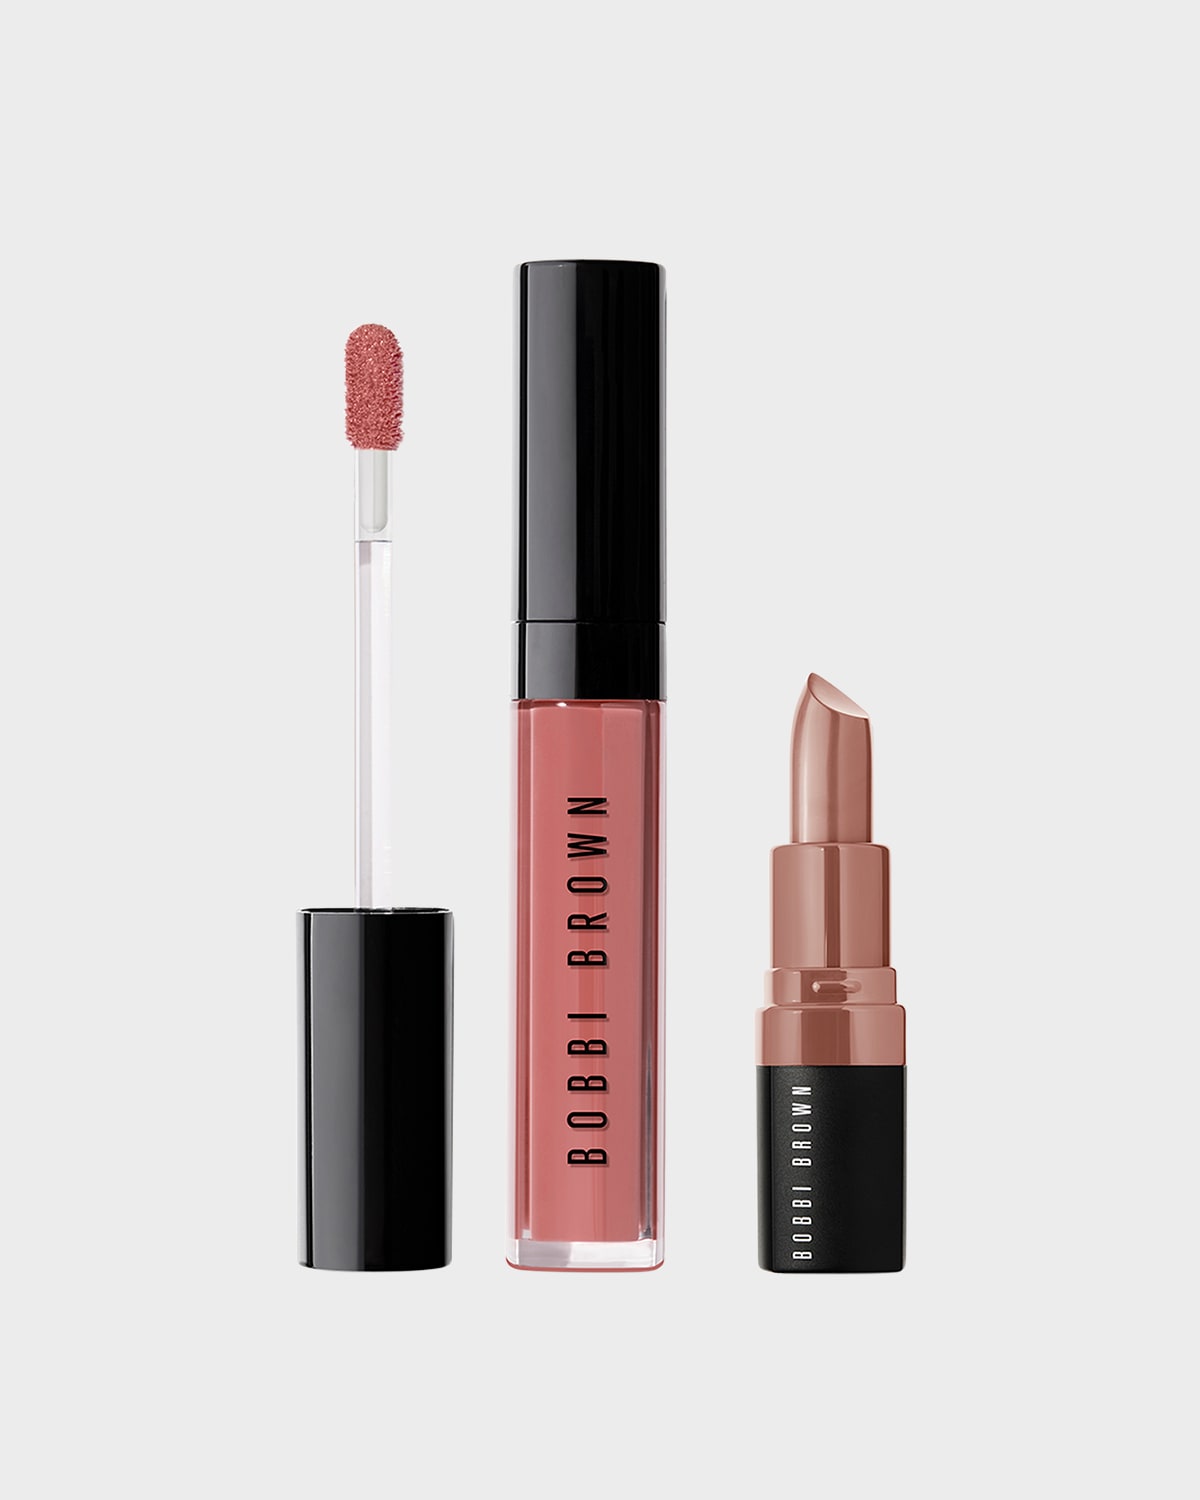 Dual Crush Lip Kit, Yours with any $100 Bobbi Brown Order